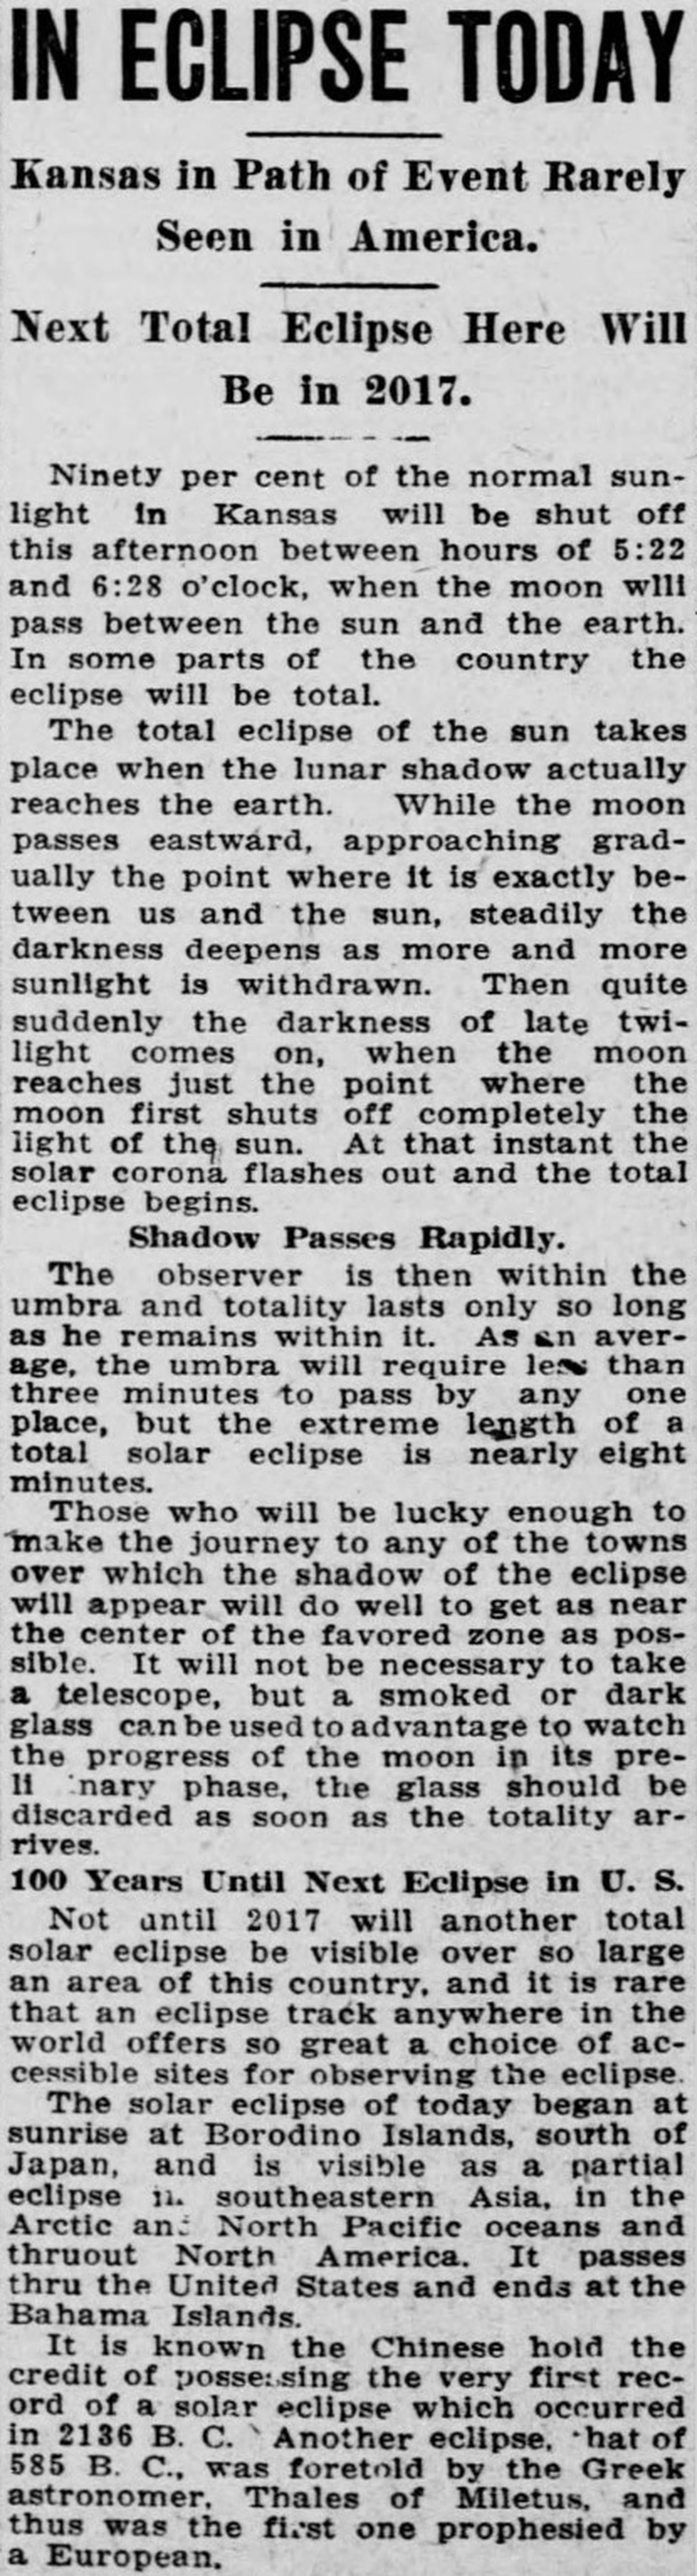 1918 article from Kansas newspaper mentioning the 2017 eclipse.